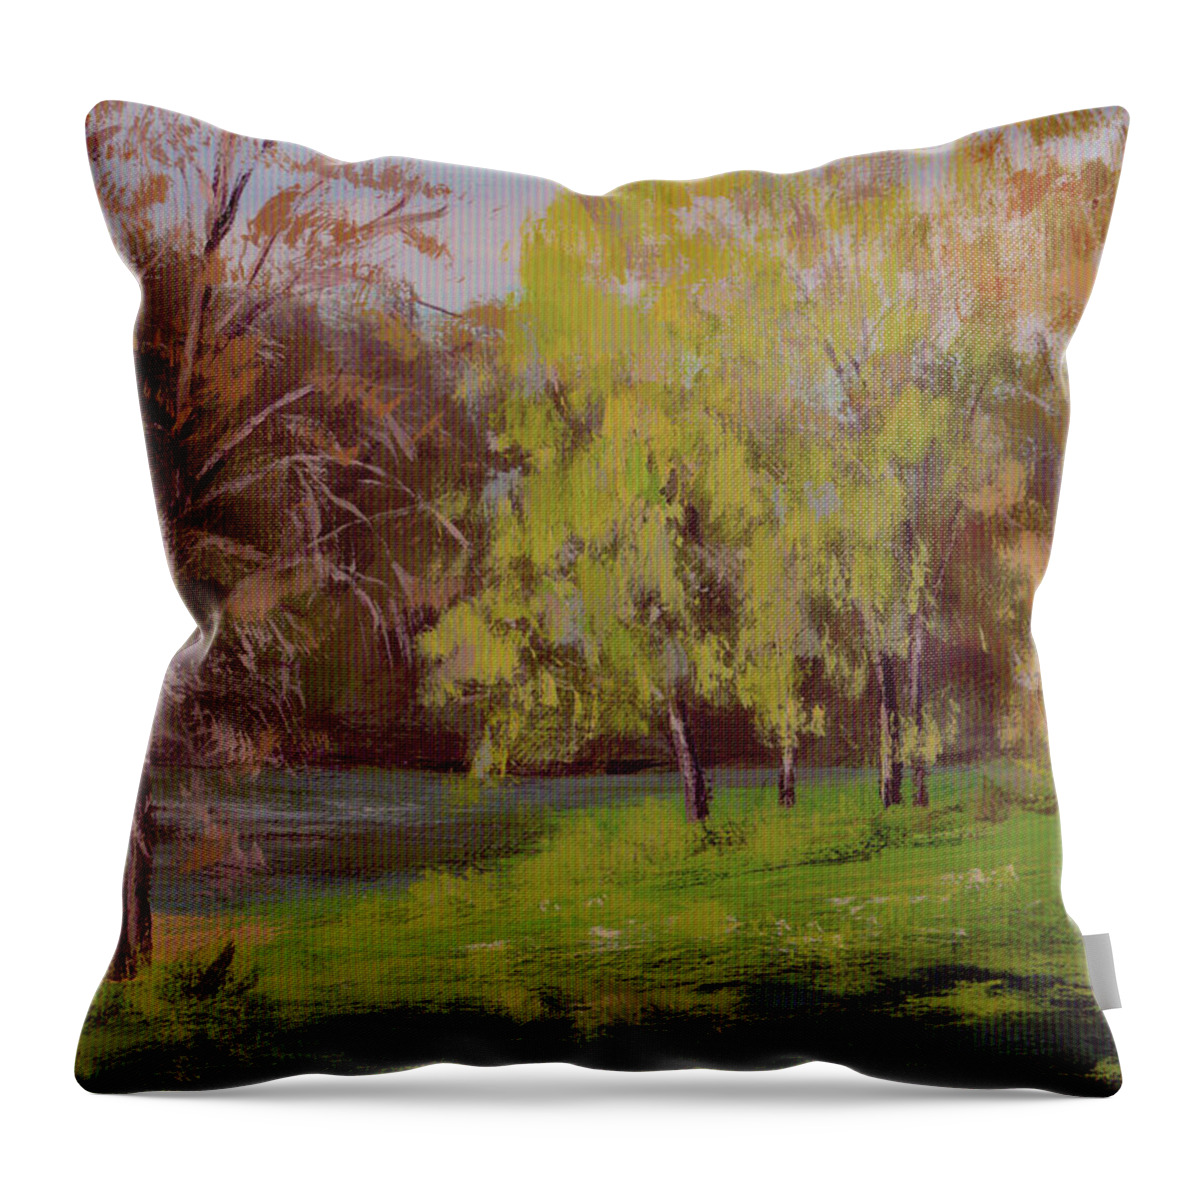 River Throw Pillow featuring the painting River Forks Spring 2 by Karen Ilari